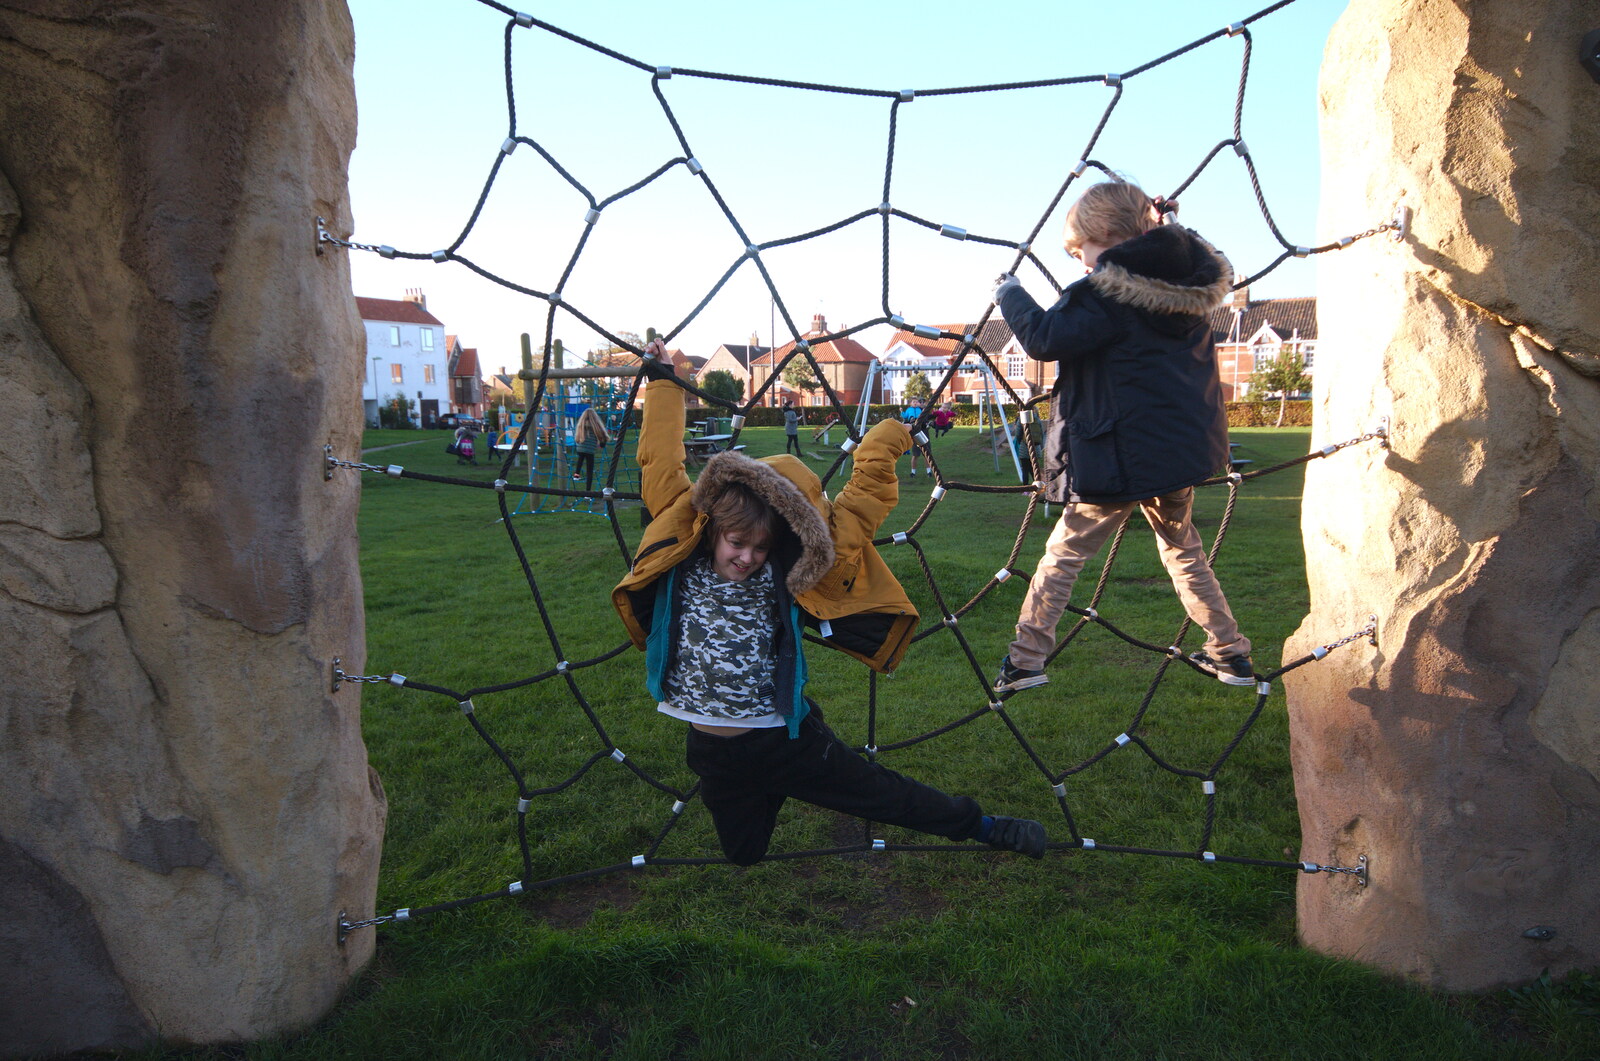 Fred and Harry mess around in the playground from A Trip up a Lighthouse, Southwold, Suffolk - 27th October 2019